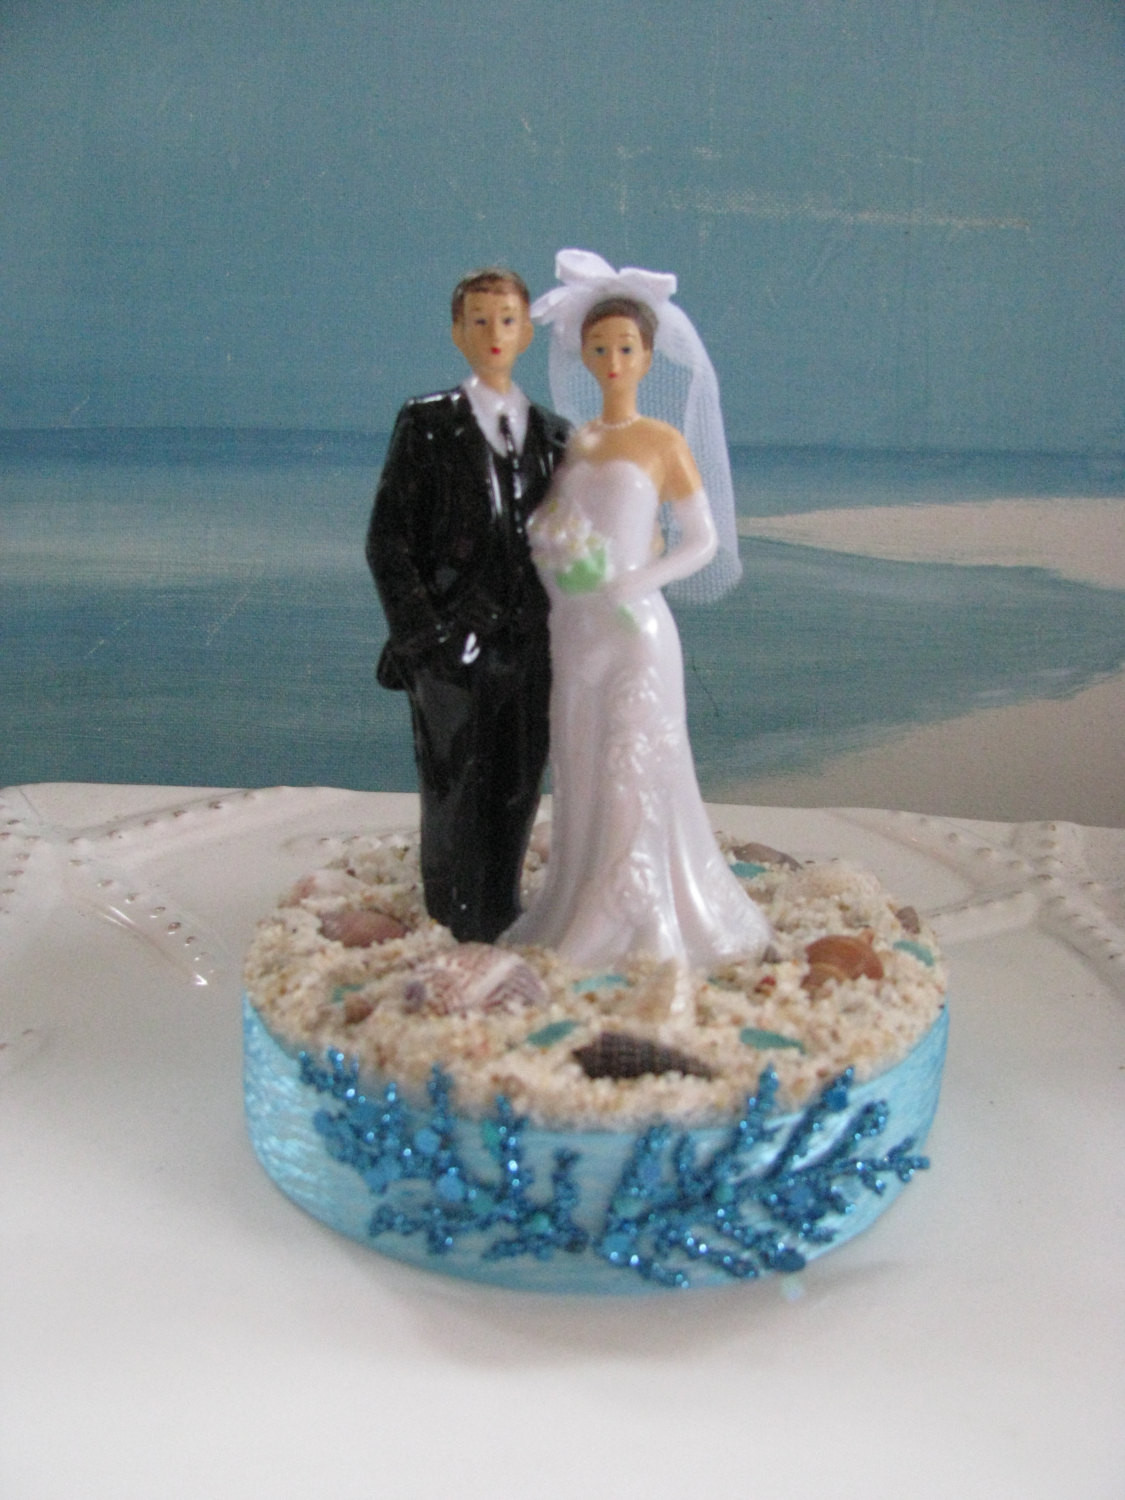 Wedding Cake Toppers Bride And Groom
 Bride and Groom Beach Wedding Cake Topper Seashell Wedding